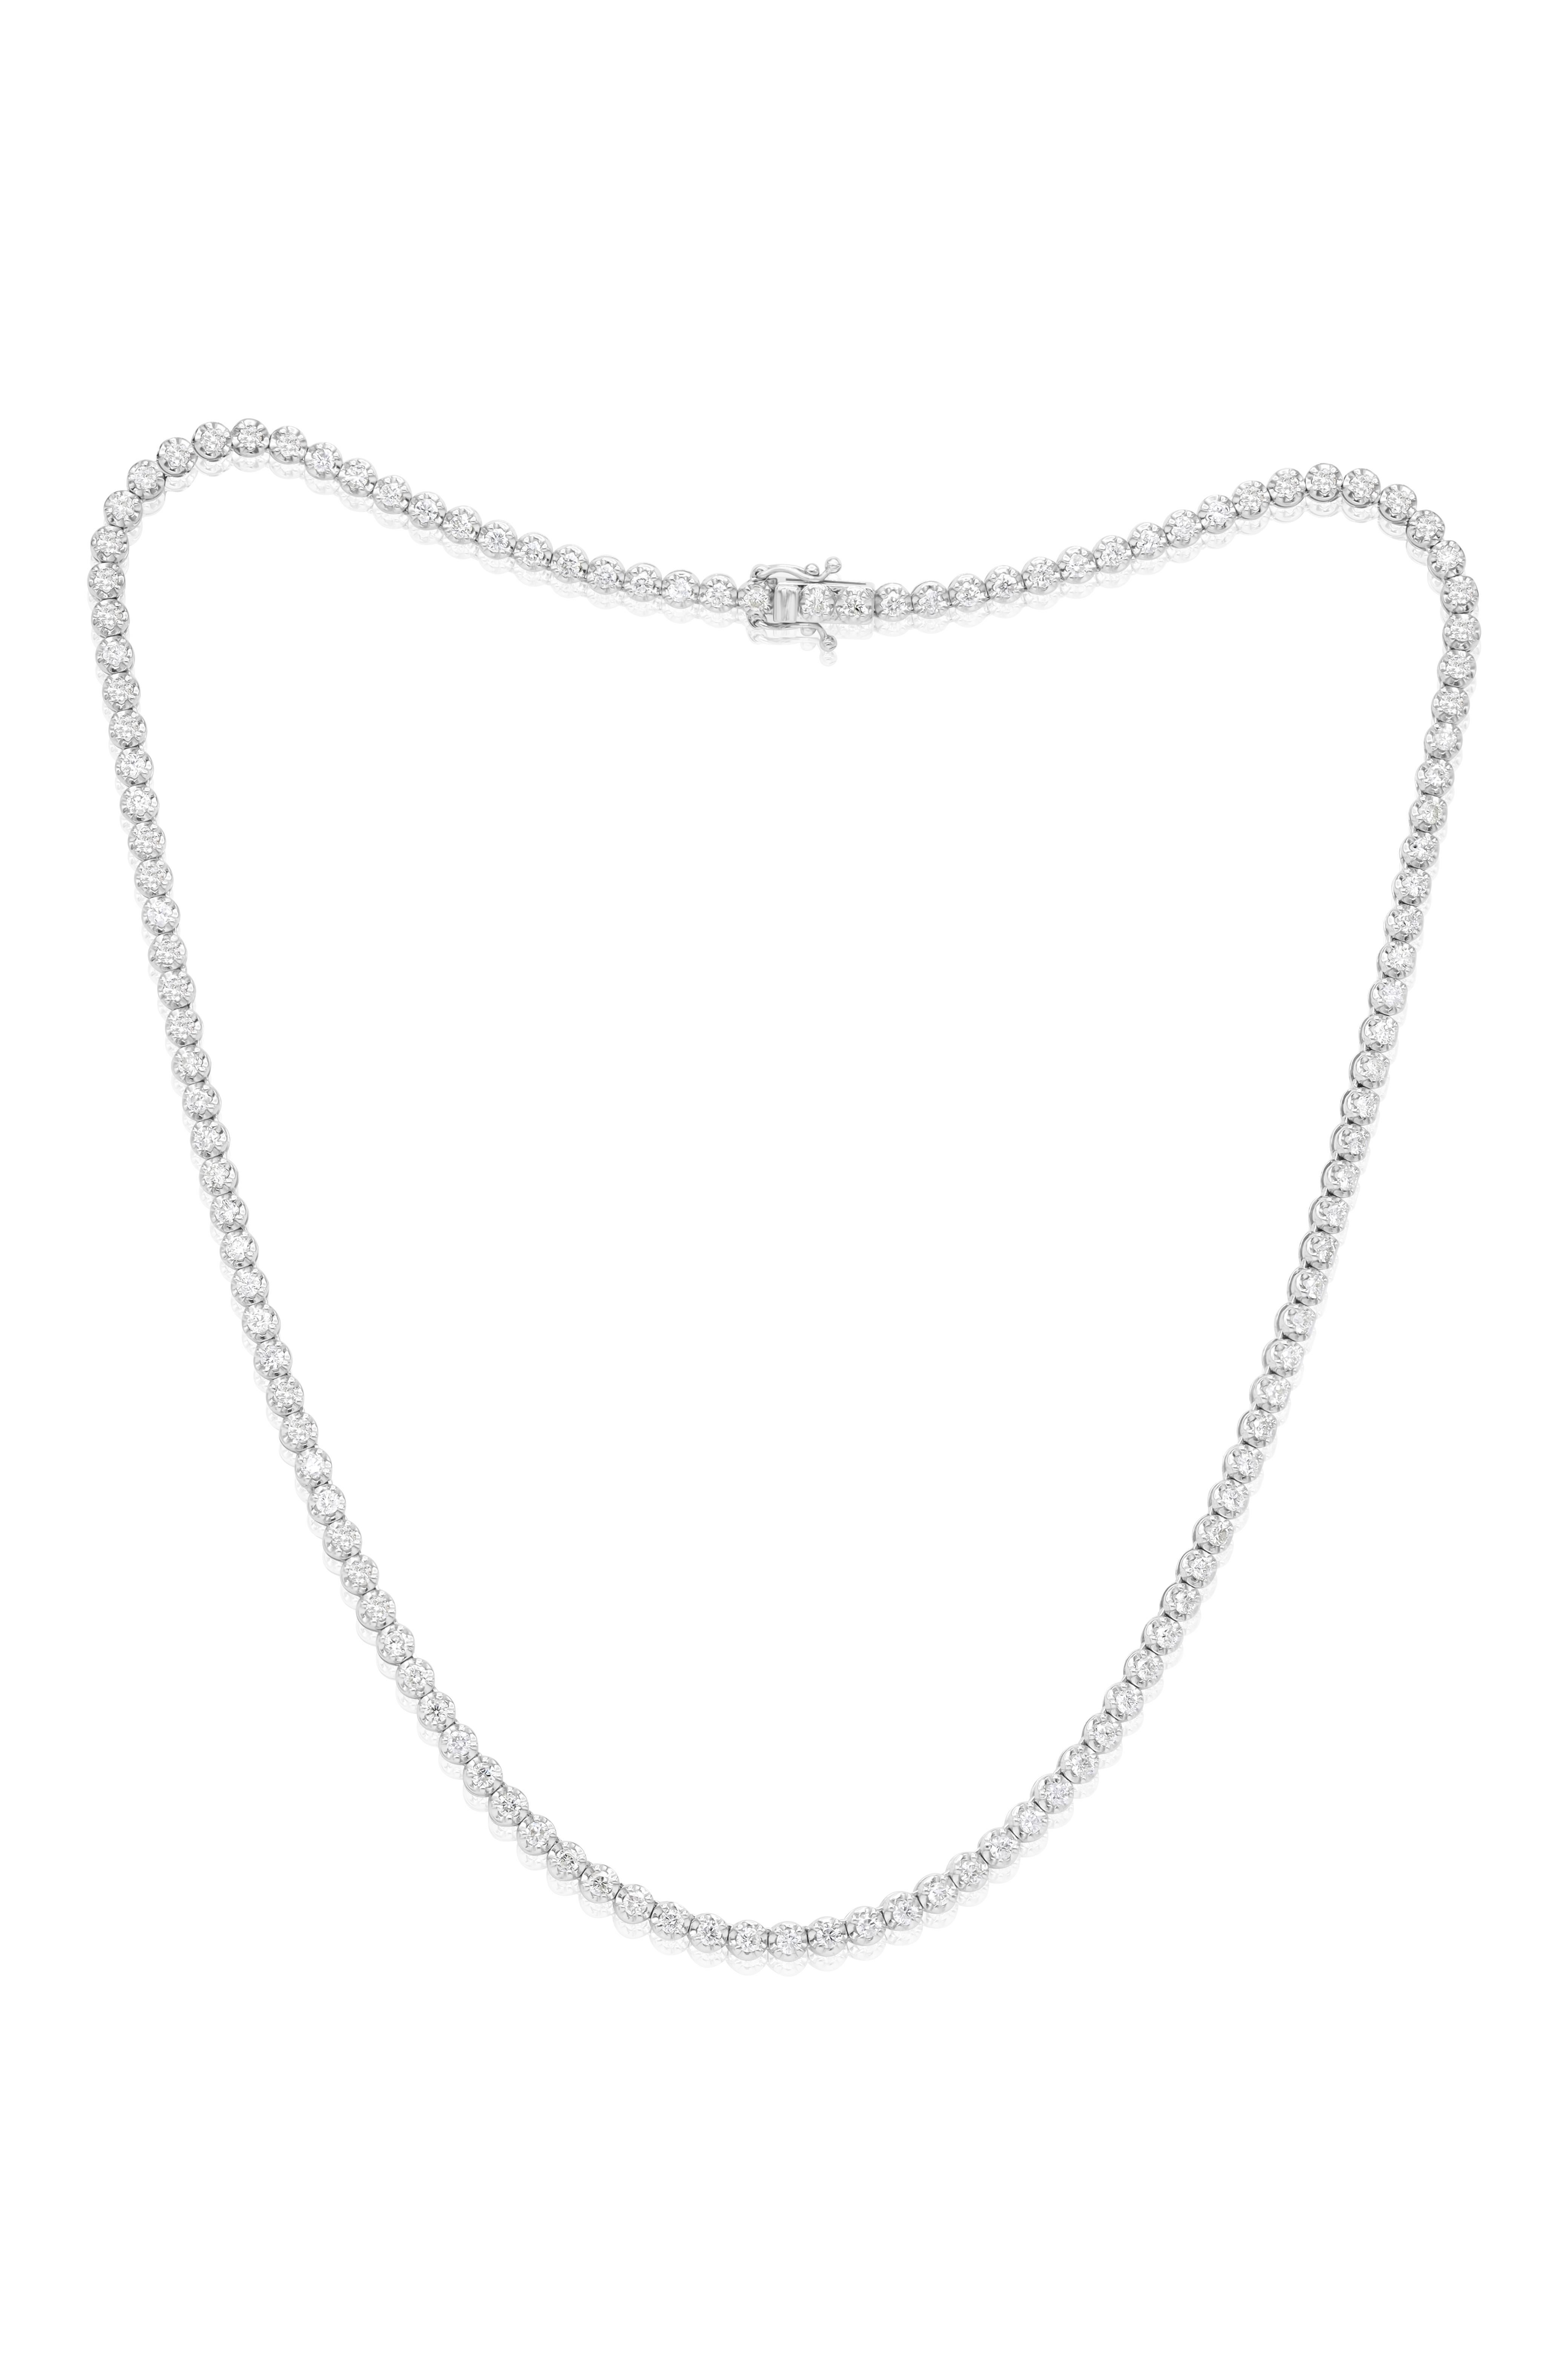 Round Cut Diana M. Custom 5.00 cts Round Diamond 14k White Gold  Tennis Necklace  For Sale